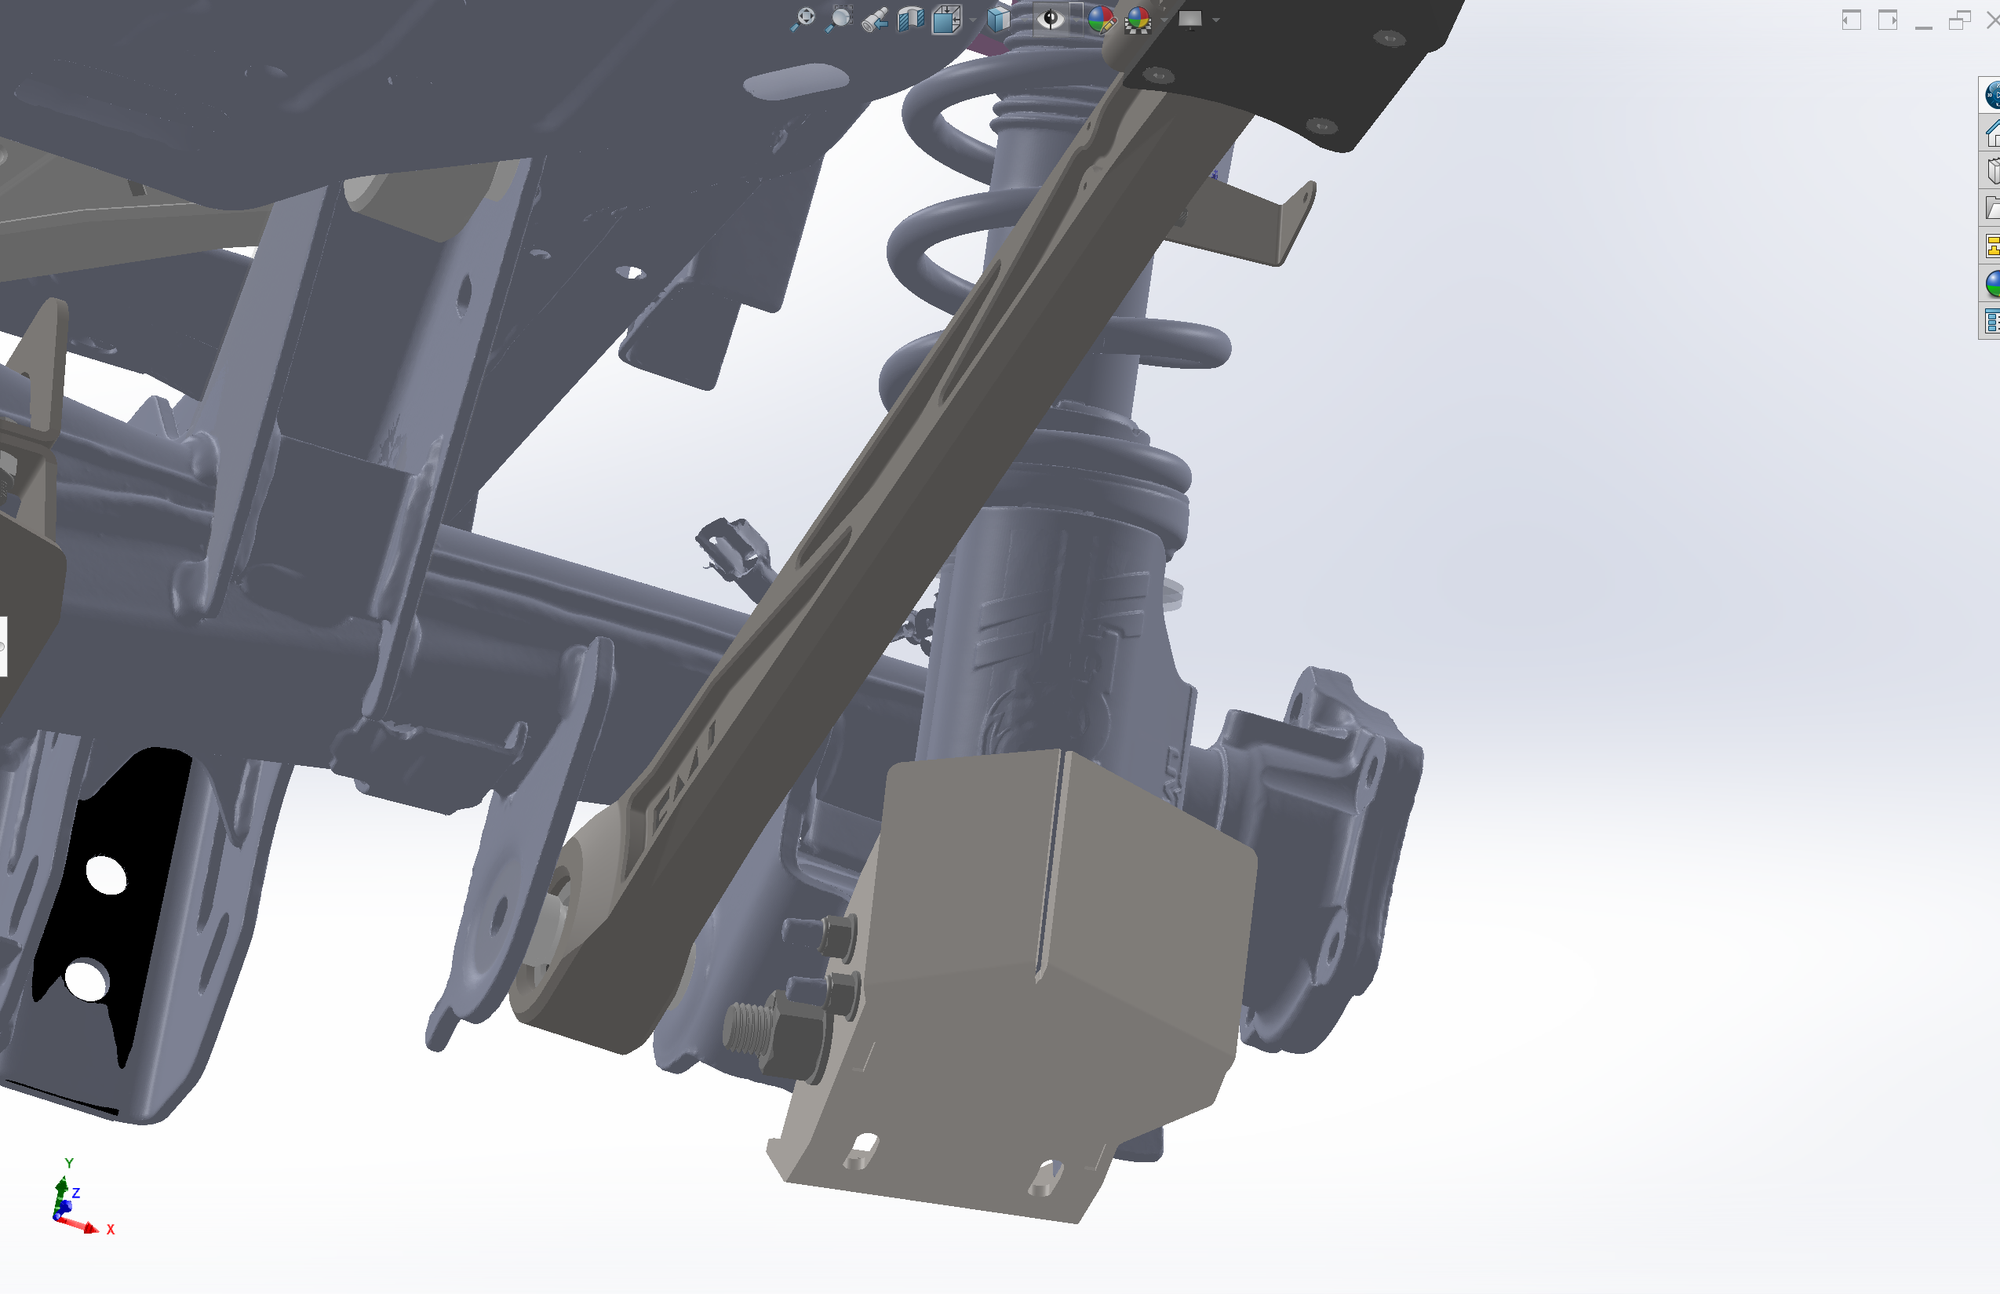 2024 Ranger Raptor rear shock skid protects the lower part of the shock and rear axle mounts